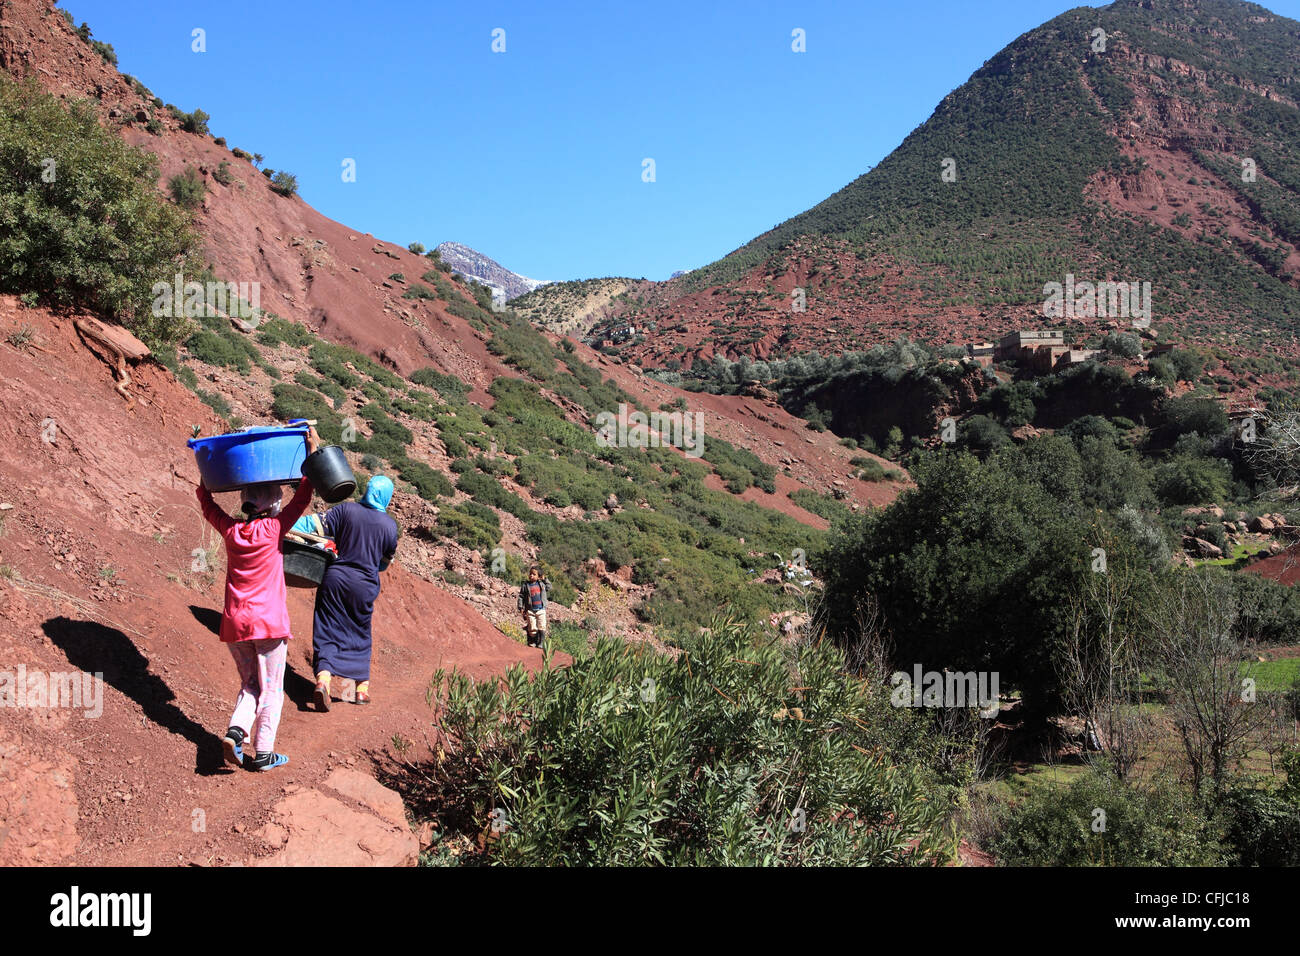 Locals working in the Vallee d'ourika in the Atlas mountains in Morocco Stock Photo